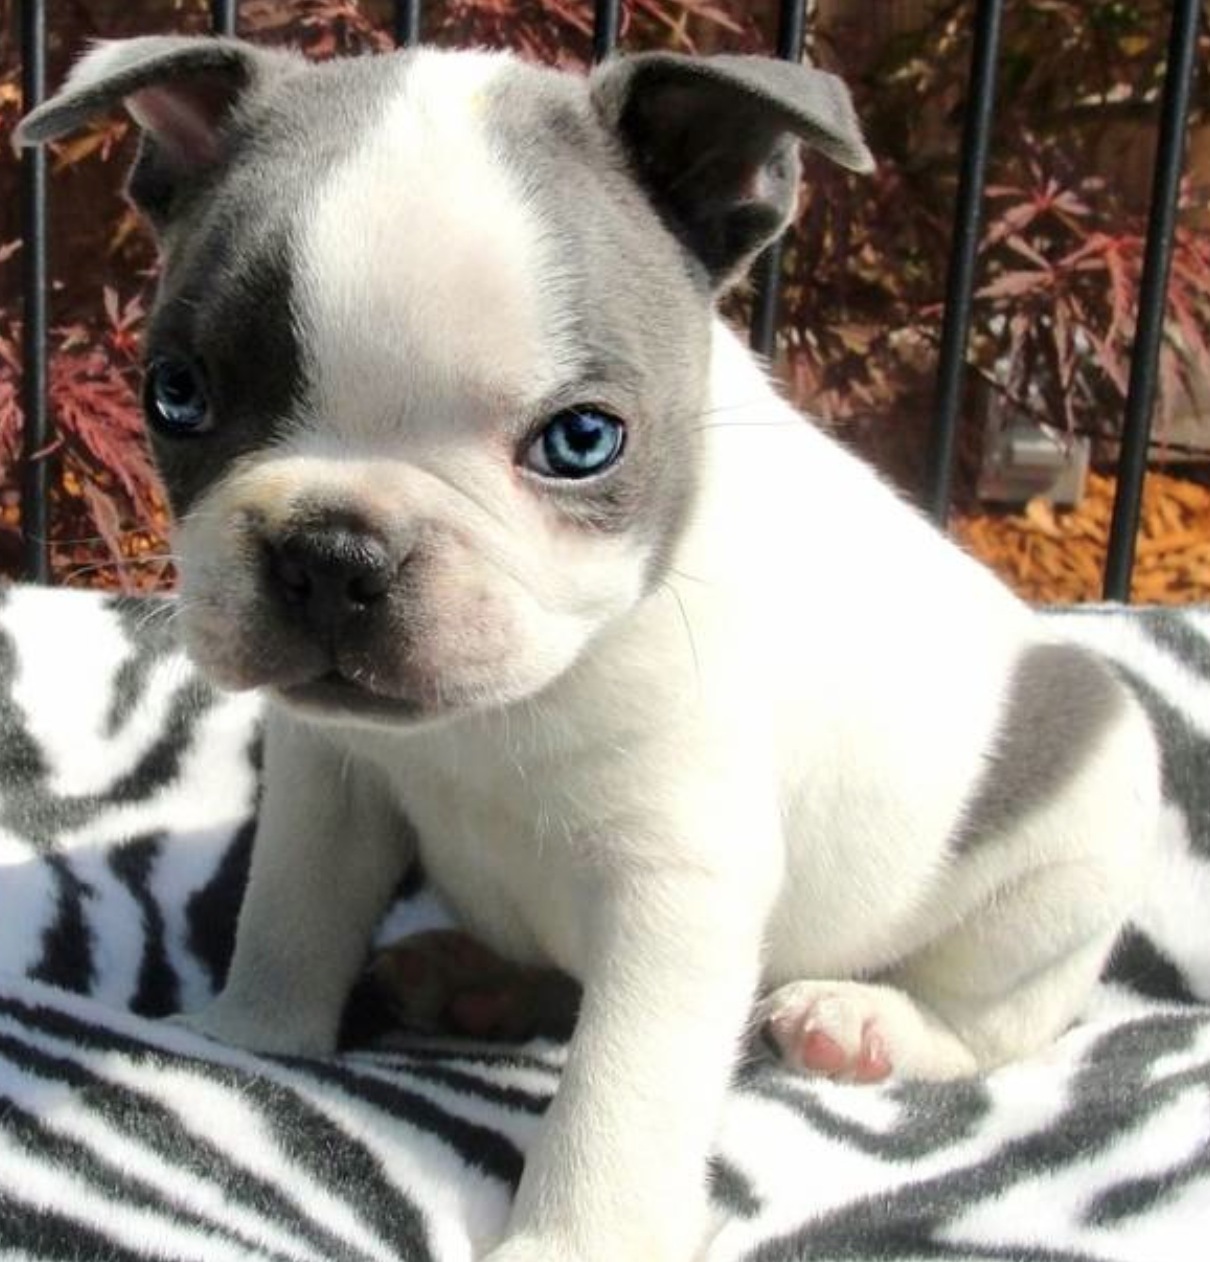 Teacup Boston Terrier with blue eyes sitting on top of a blanket outdoors under the sun